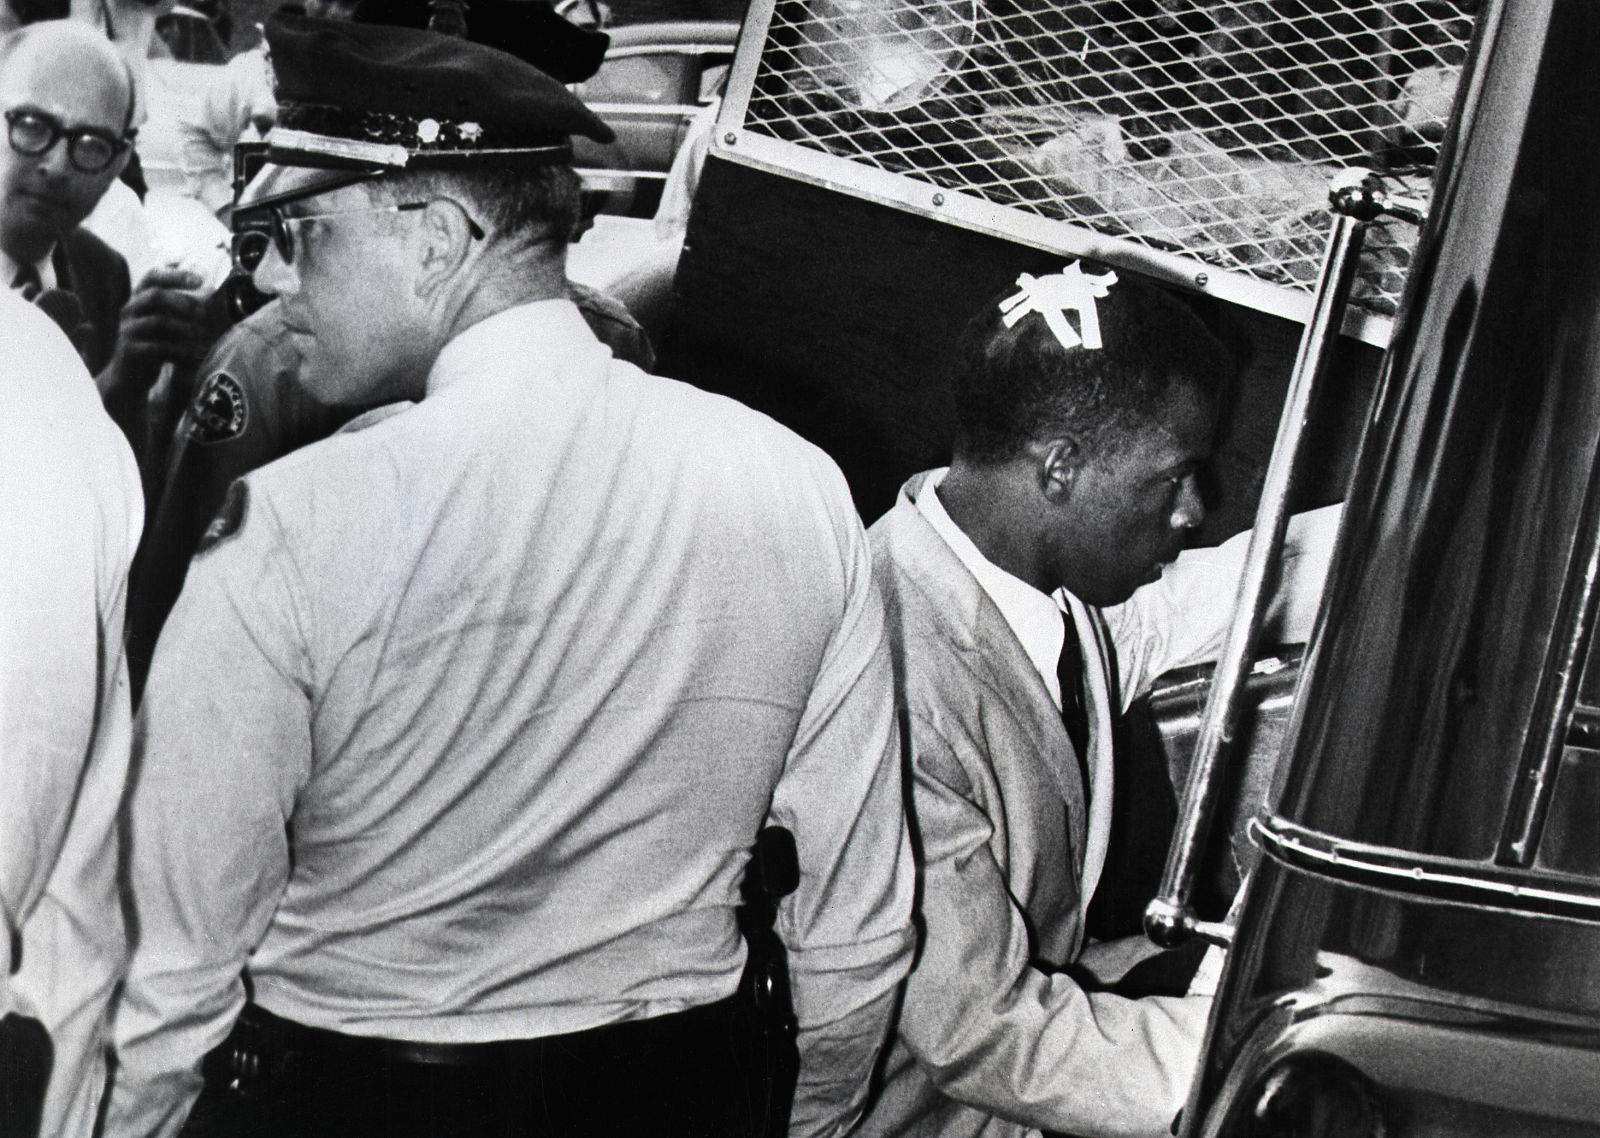 Lewis has tape on his head, marking the spot where he was struck during racial violence in Montgomery, Alabama, in May 1961. That month, the Freedom Ride movement began with interstate buses driving into the Deep South to challenge segregation that persisted despite recent Supreme Court rulings. In some cities, the activists were arrested and brutally beaten.